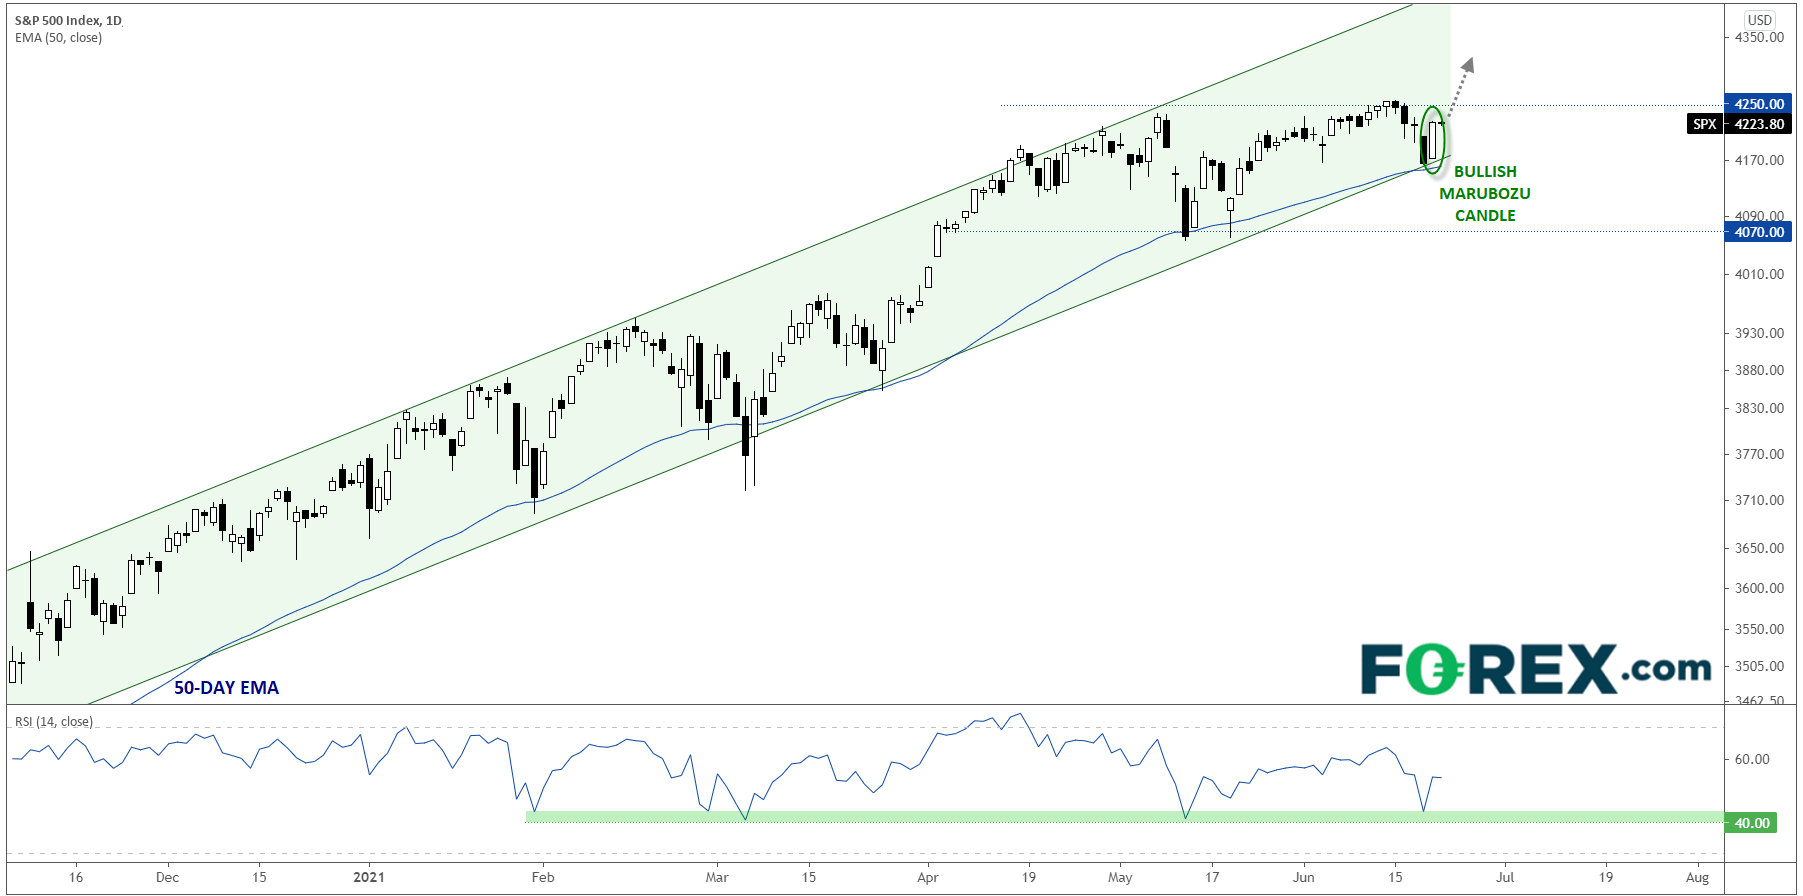 Chart analysis shows Sp 500 Finds Support Record Highs In Sight. Published in June 2021 by FOREX.com